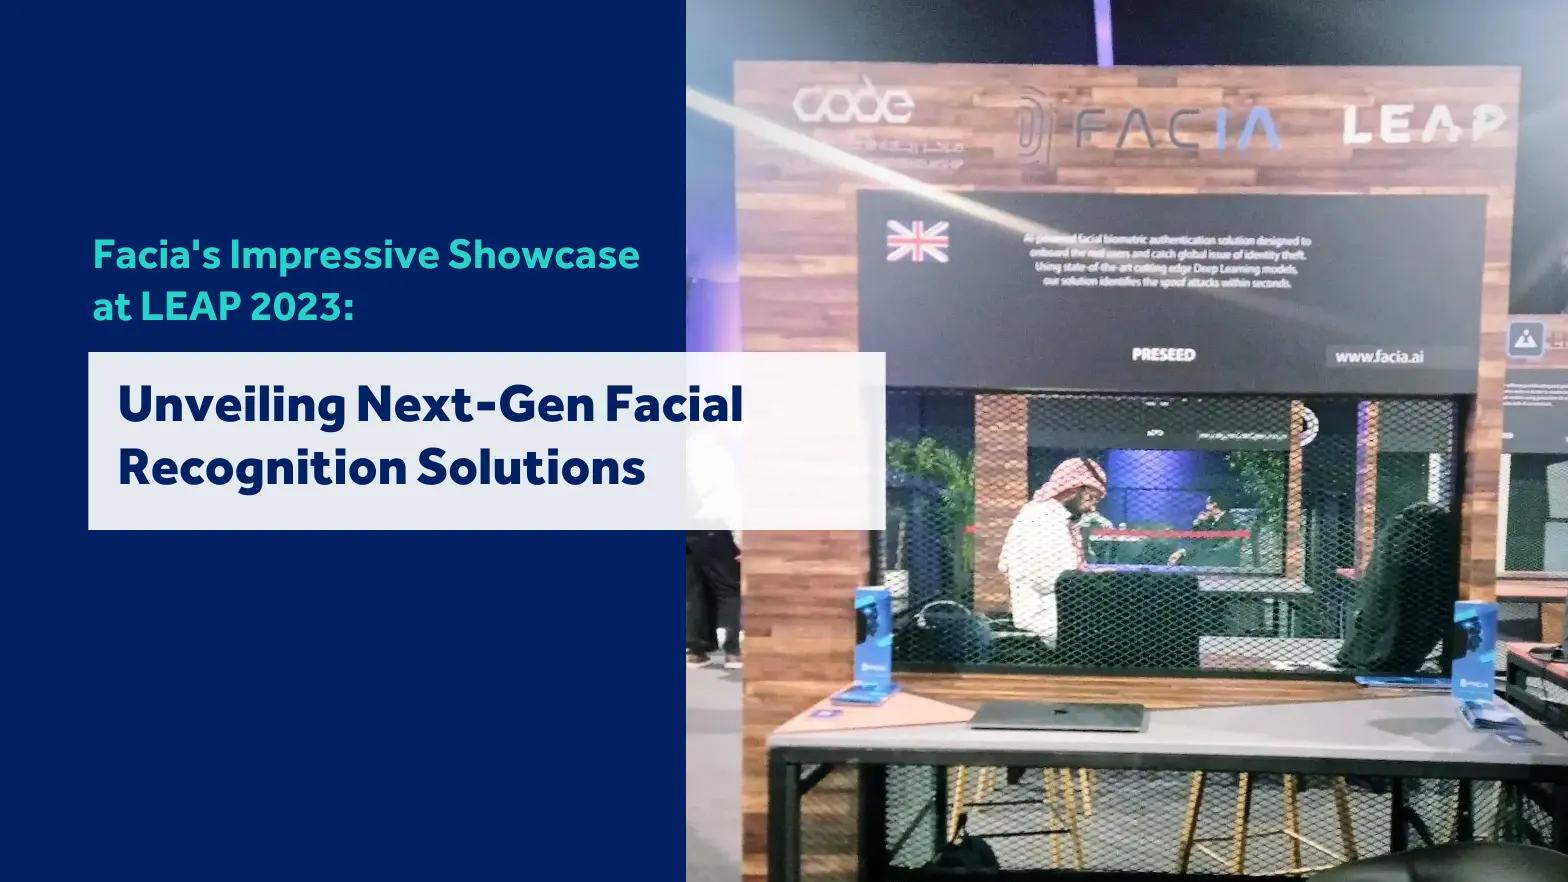 Facia's exhibition booth at LEAP 2023: Showcasing AI-powered face recognition and liveness detection solutions for enhanced security.